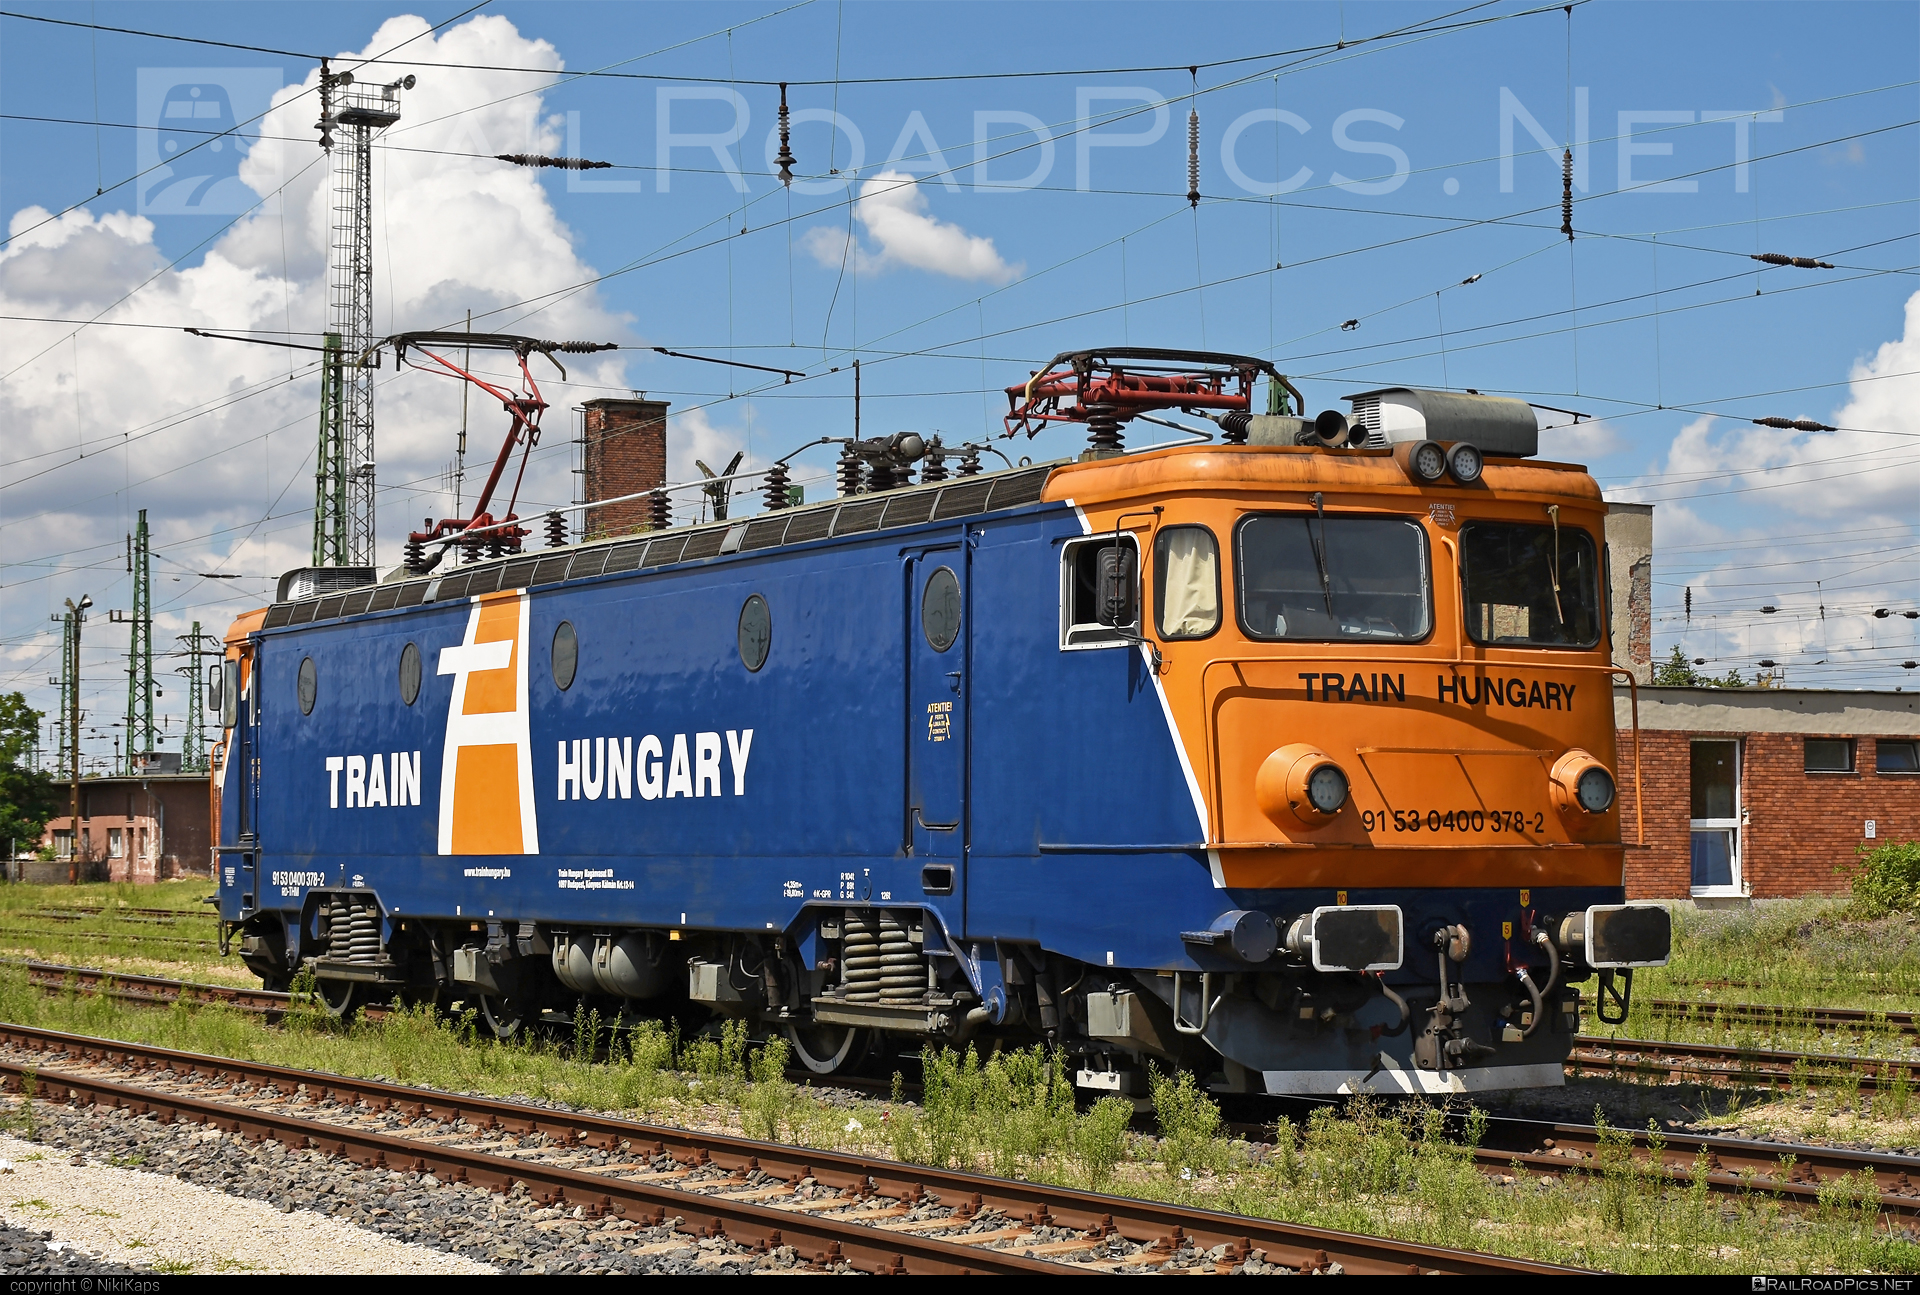 Electroputere LE 5100 - 0400 378-2 operated by Train Hungary Magánvasút Kft #TrainHungaryMaganvasut #TrainHungaryMaganvasutKft #electroputere #electroputerecraiova #electroputerele5100 #le5100